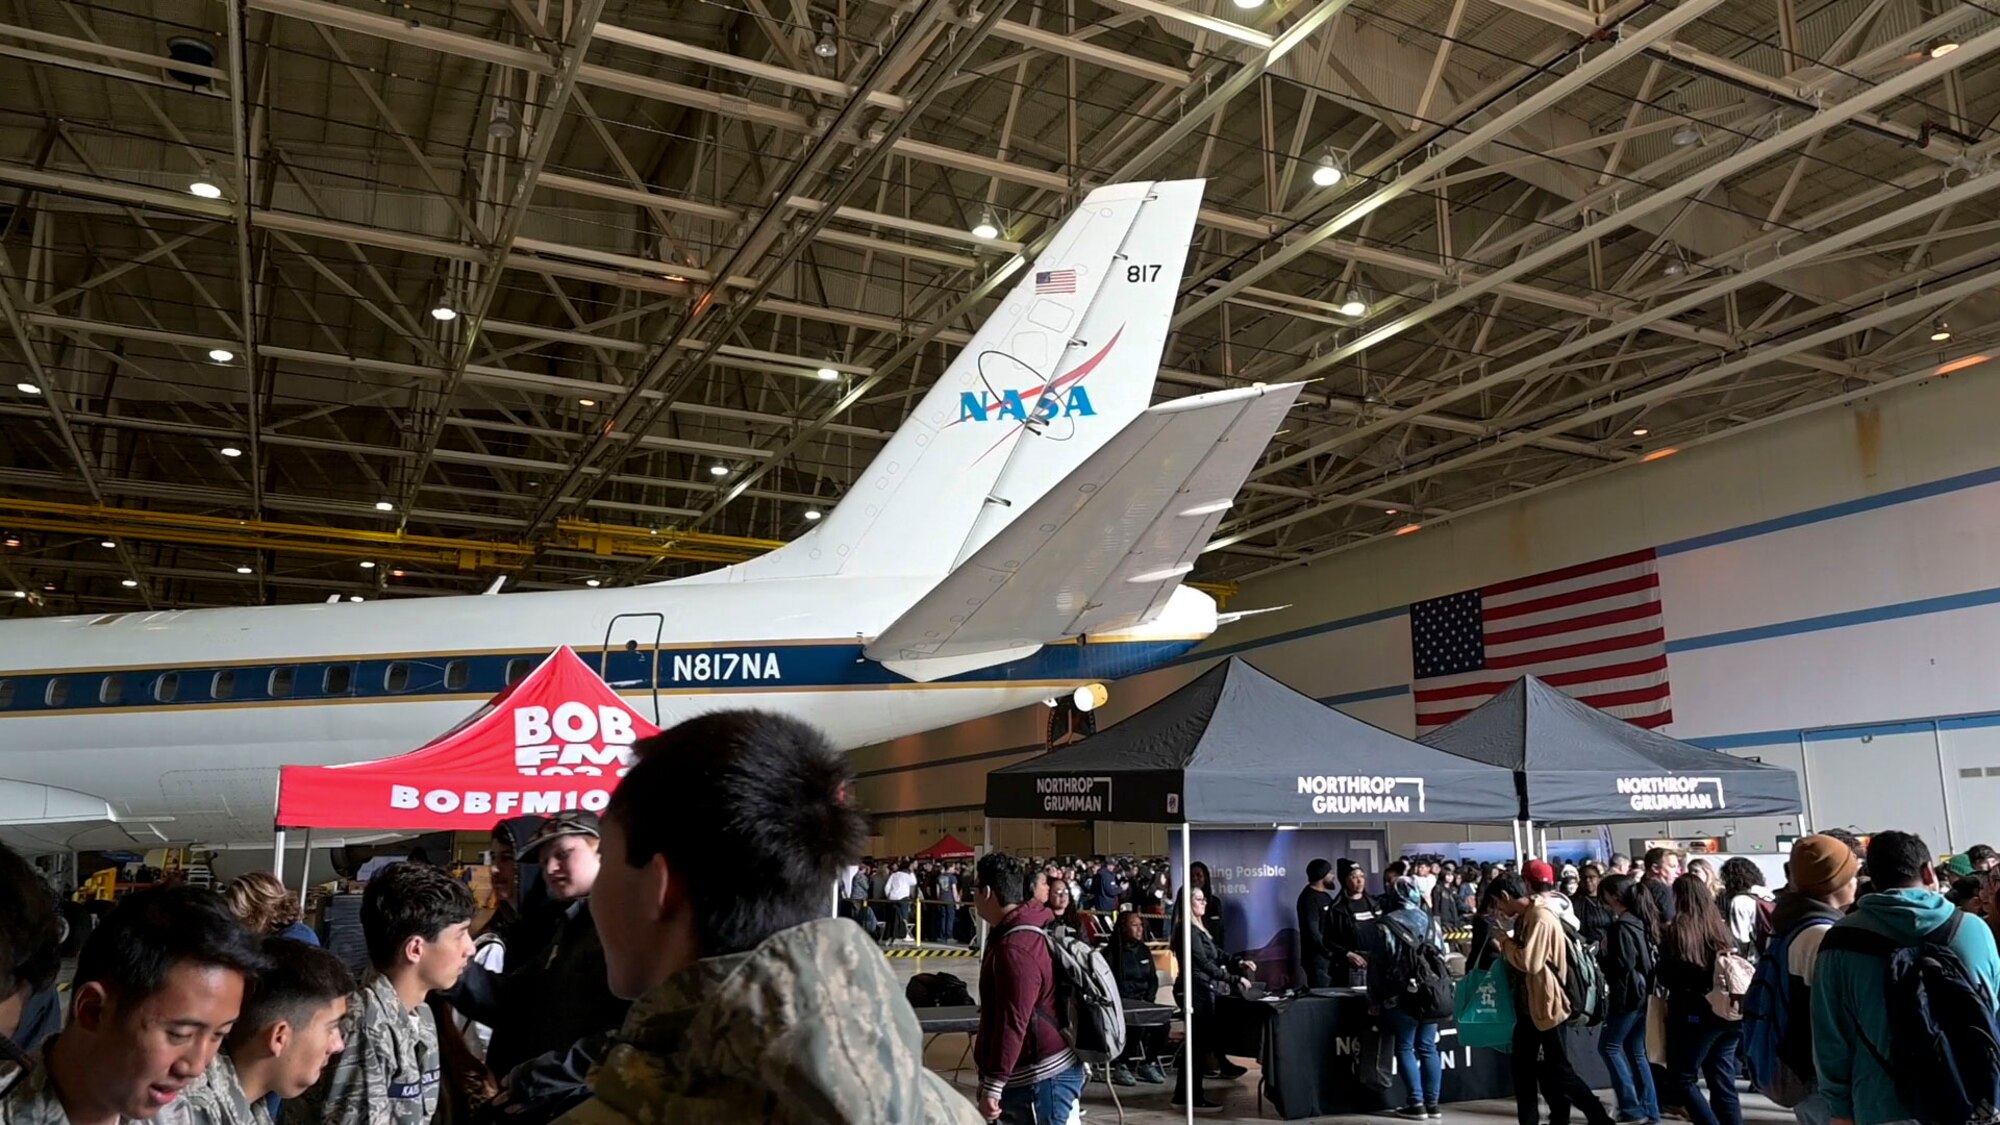 The goal of the festival was to highlight career pathways available to youth in aerospace, military, local government and STEM-related many other trades needed for the aerospace in aviation industry.